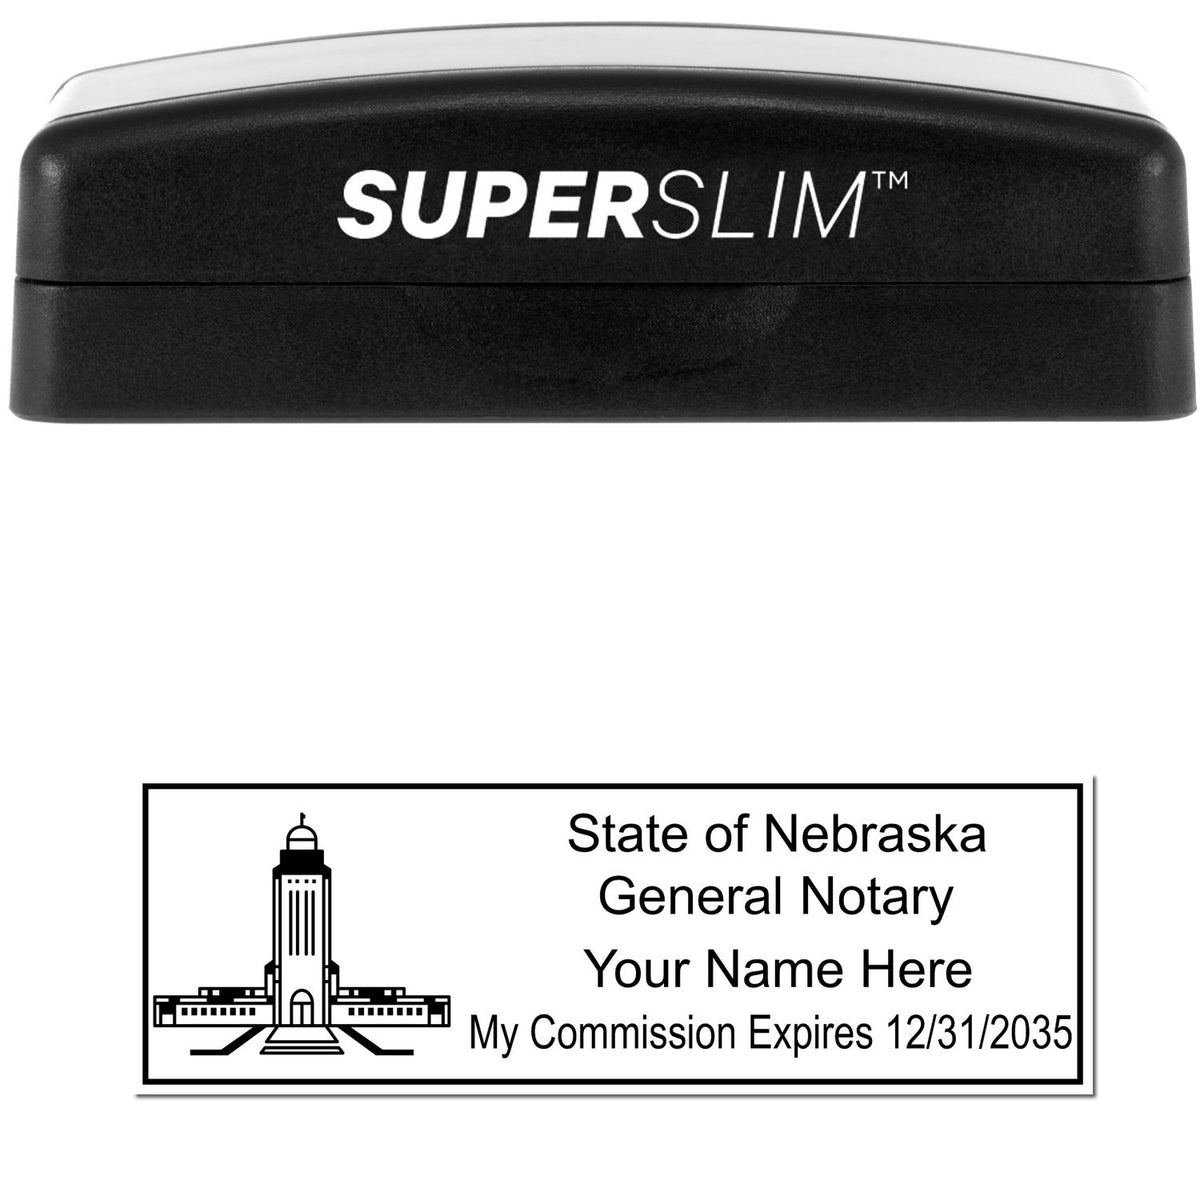 The main image for the Super Slim Nebraska Notary Public Stamp depicting a sample of the imprint and electronic files